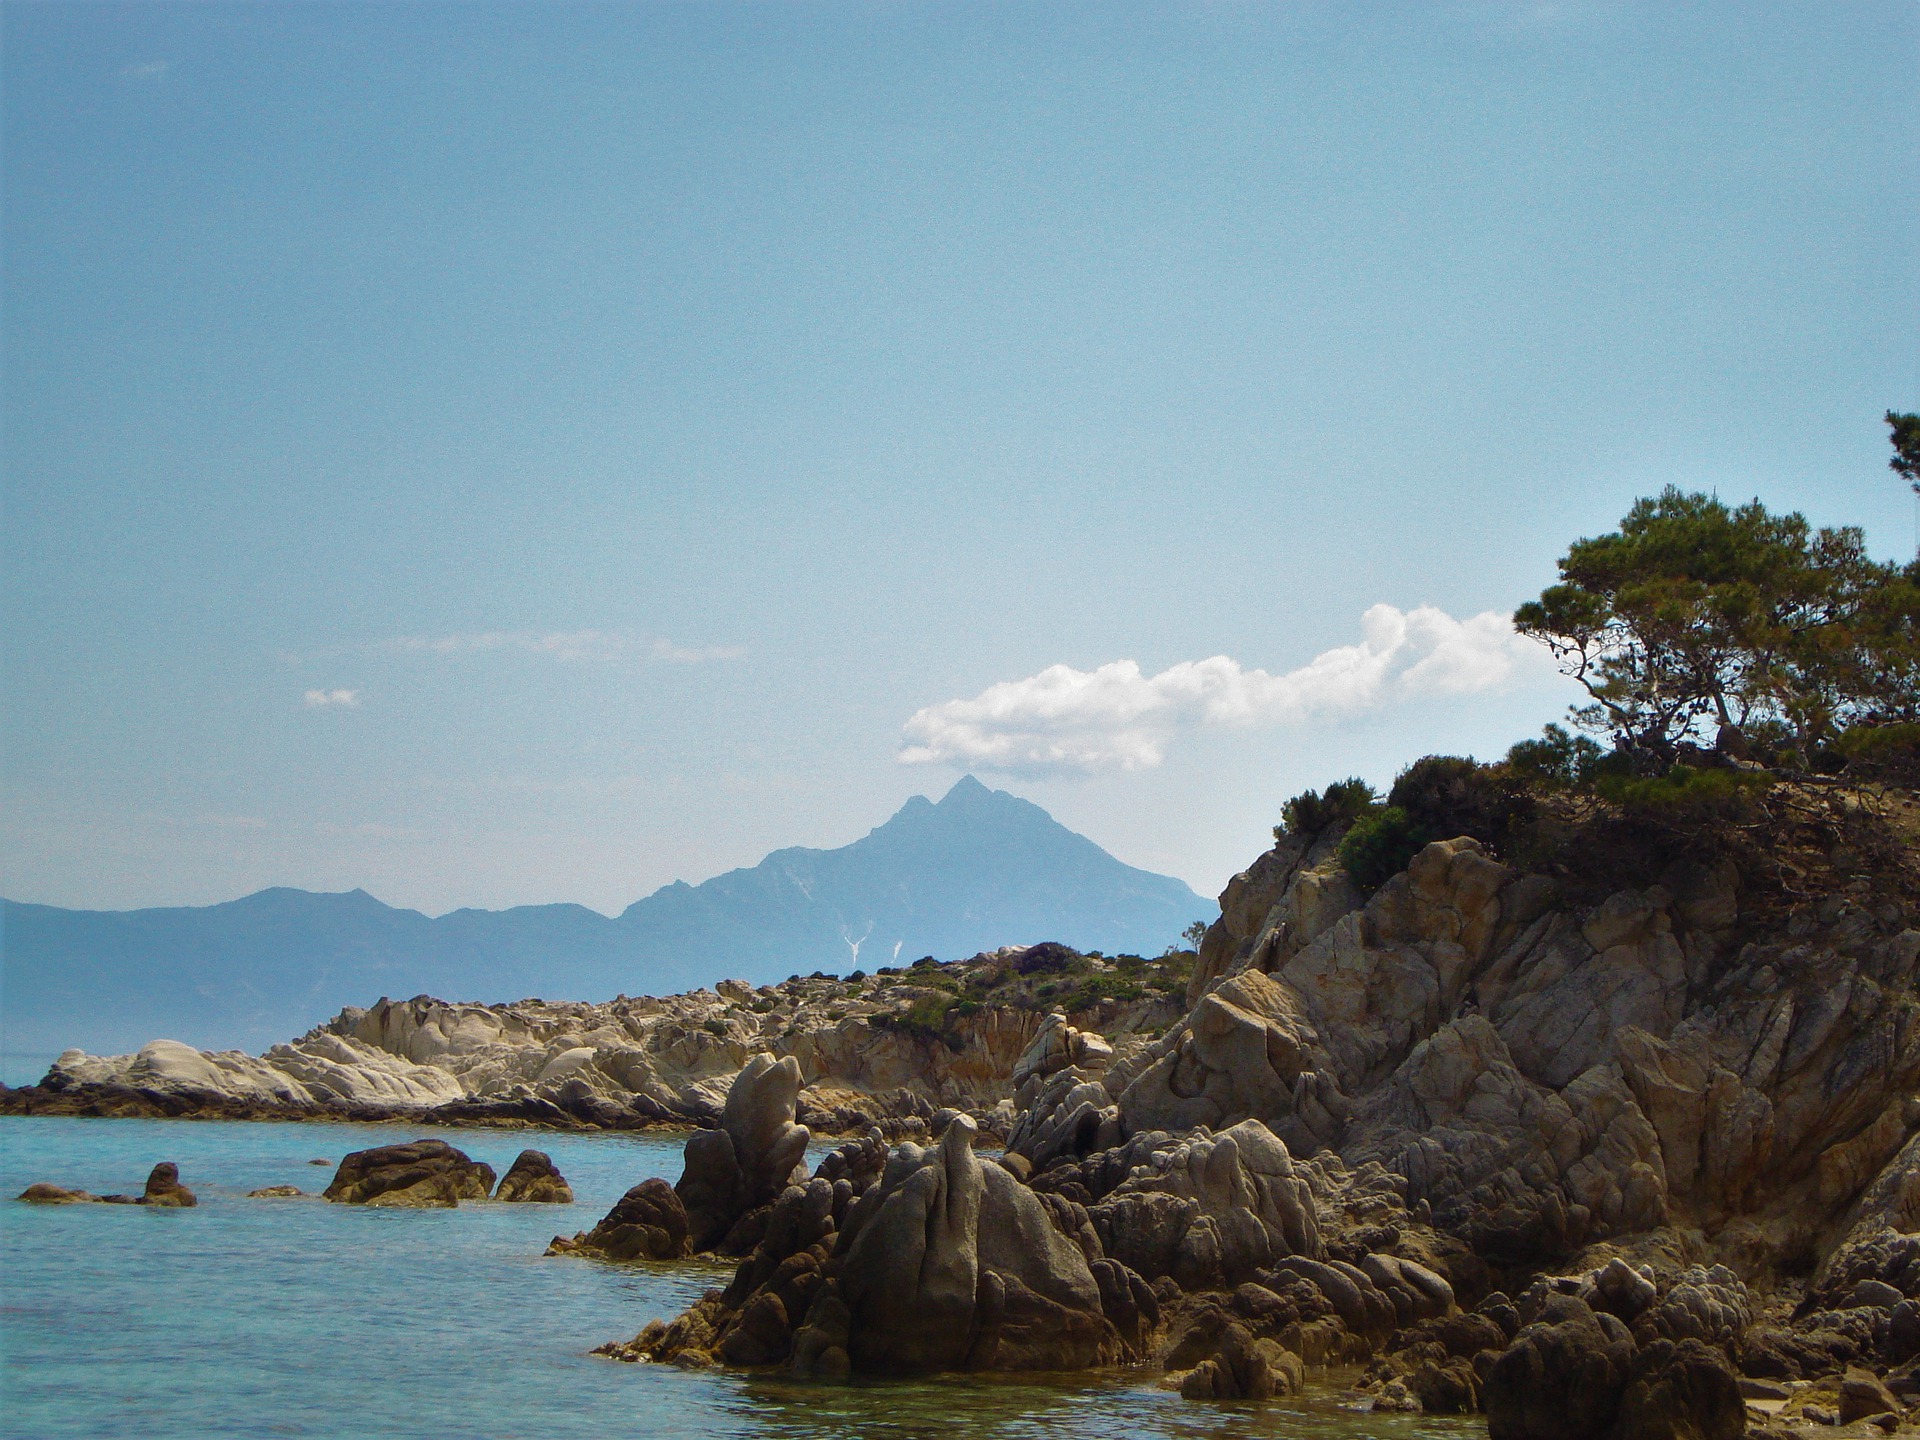 A rocky shore with mountains in the background on a clear day on the Halkidiki coast